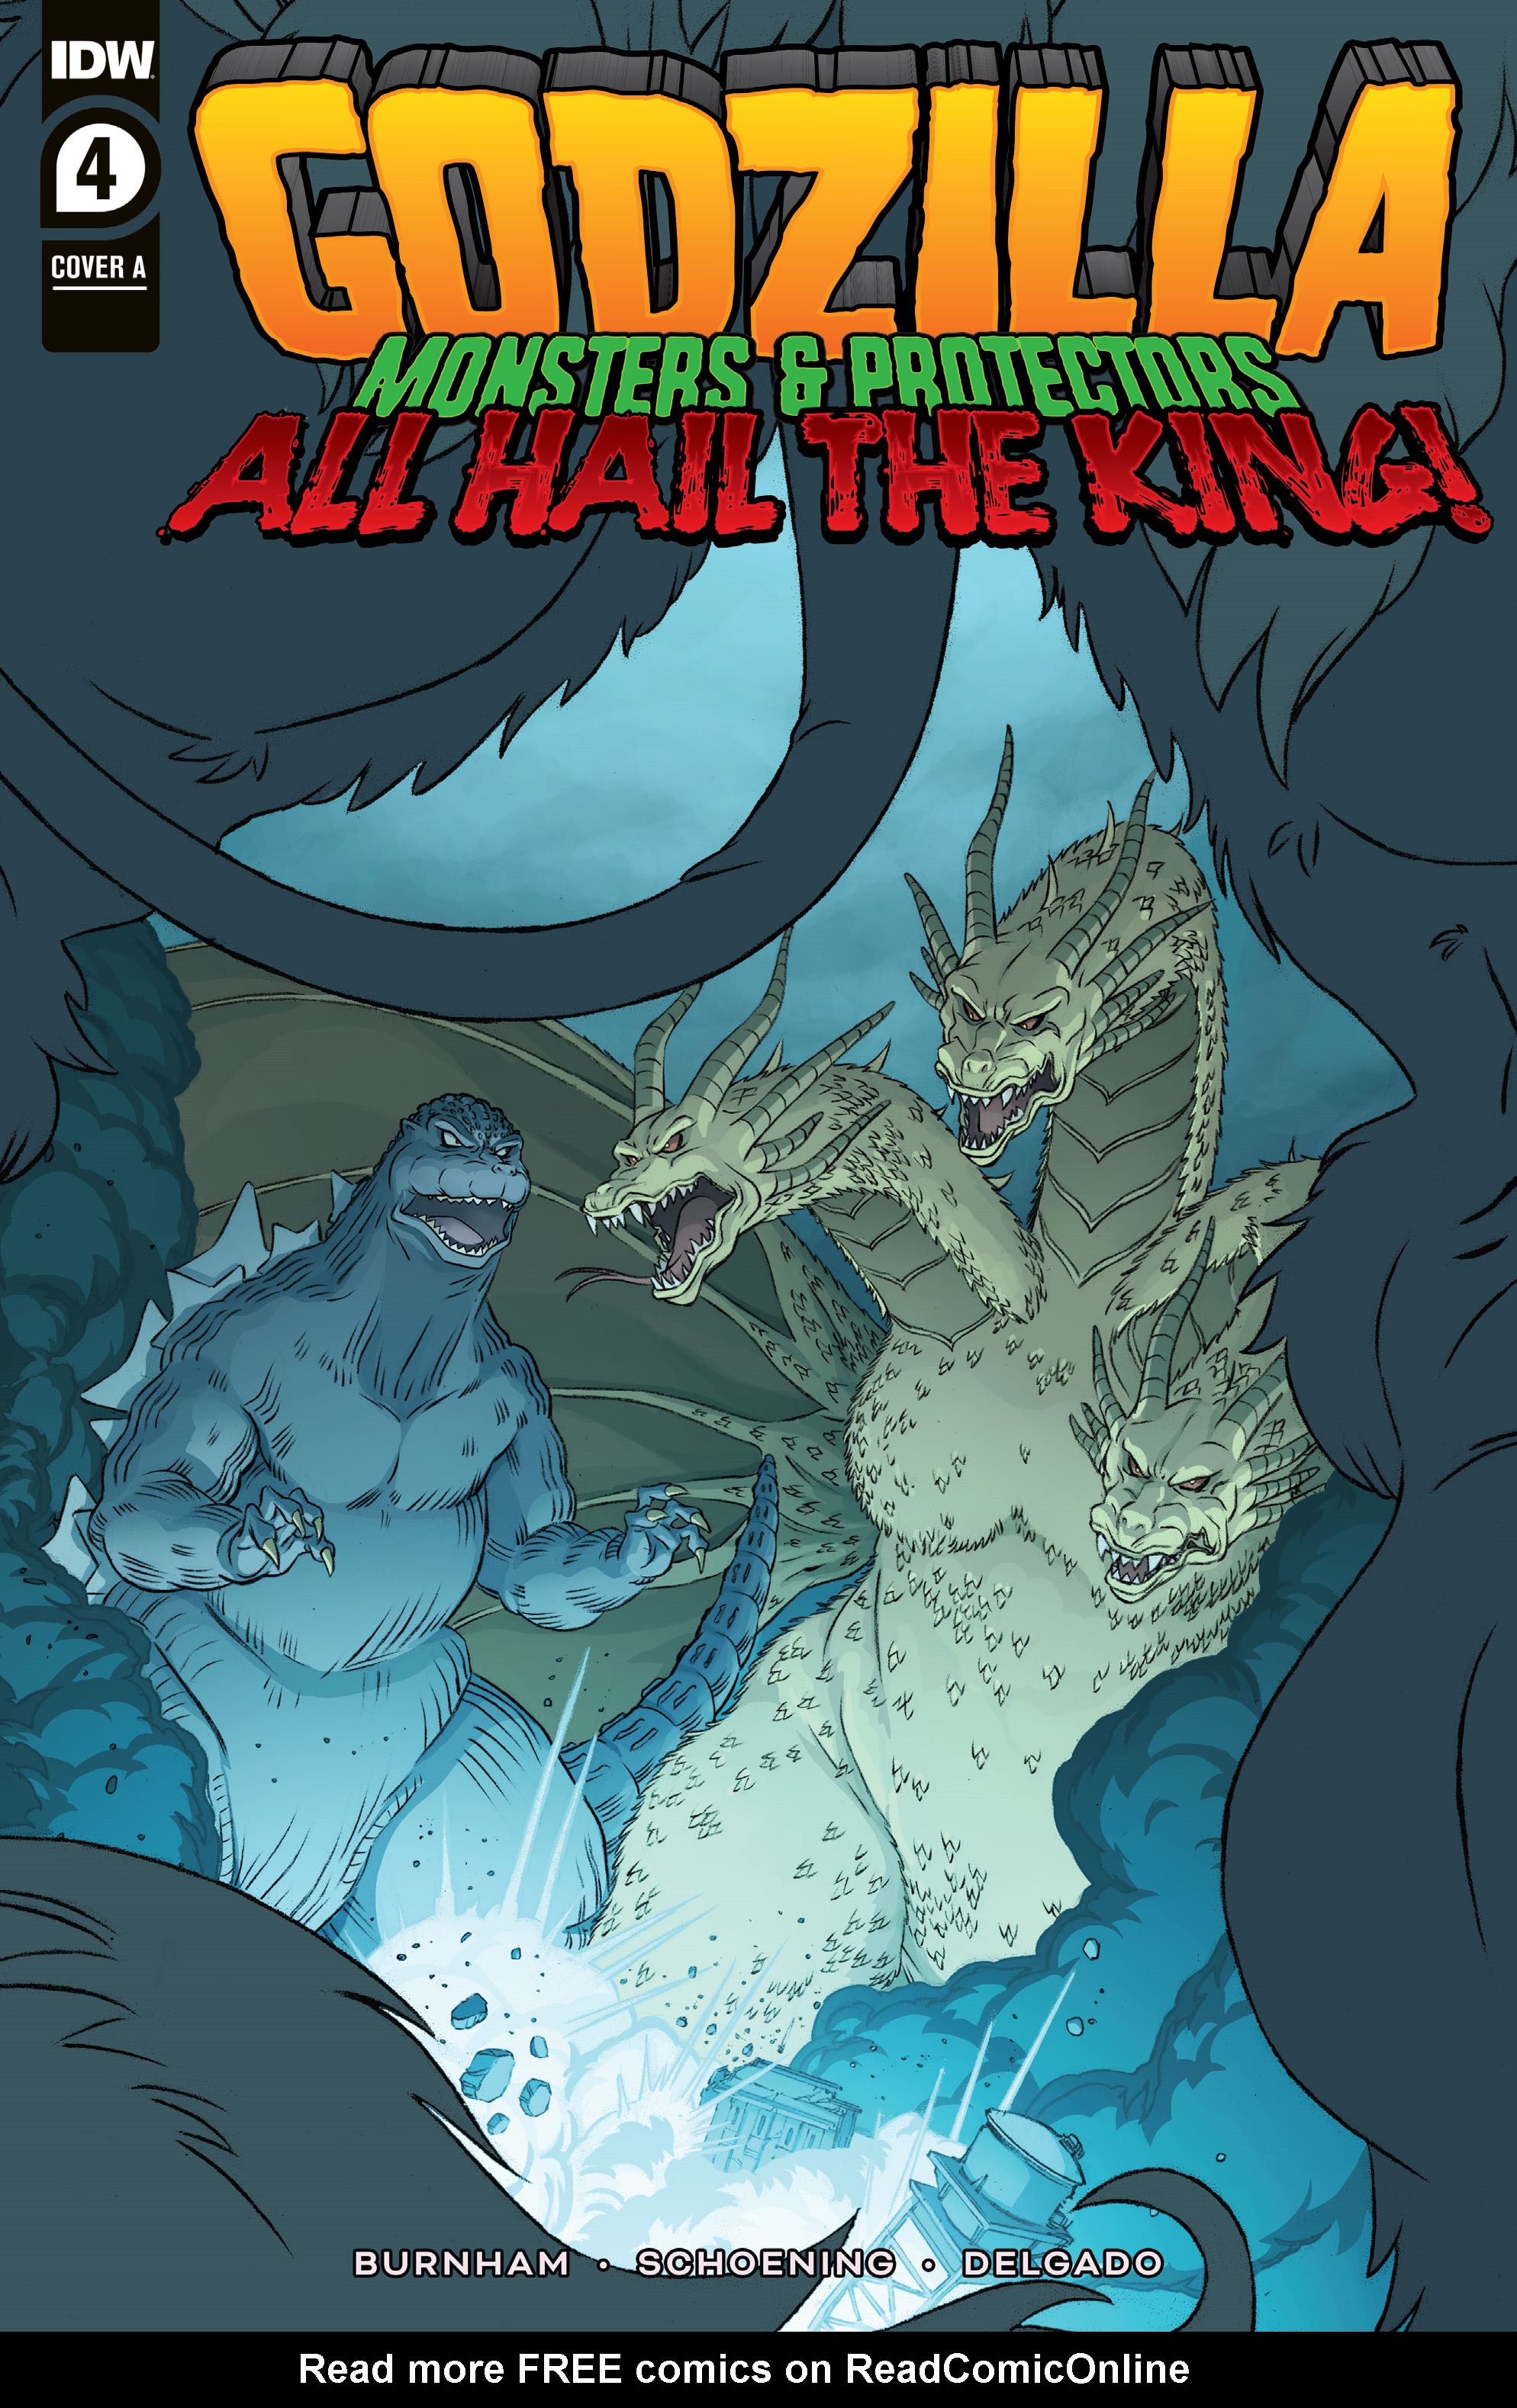 Read online Godzilla: Monsters & Protectors - All Hail the King! comic -  Issue #4 - 1